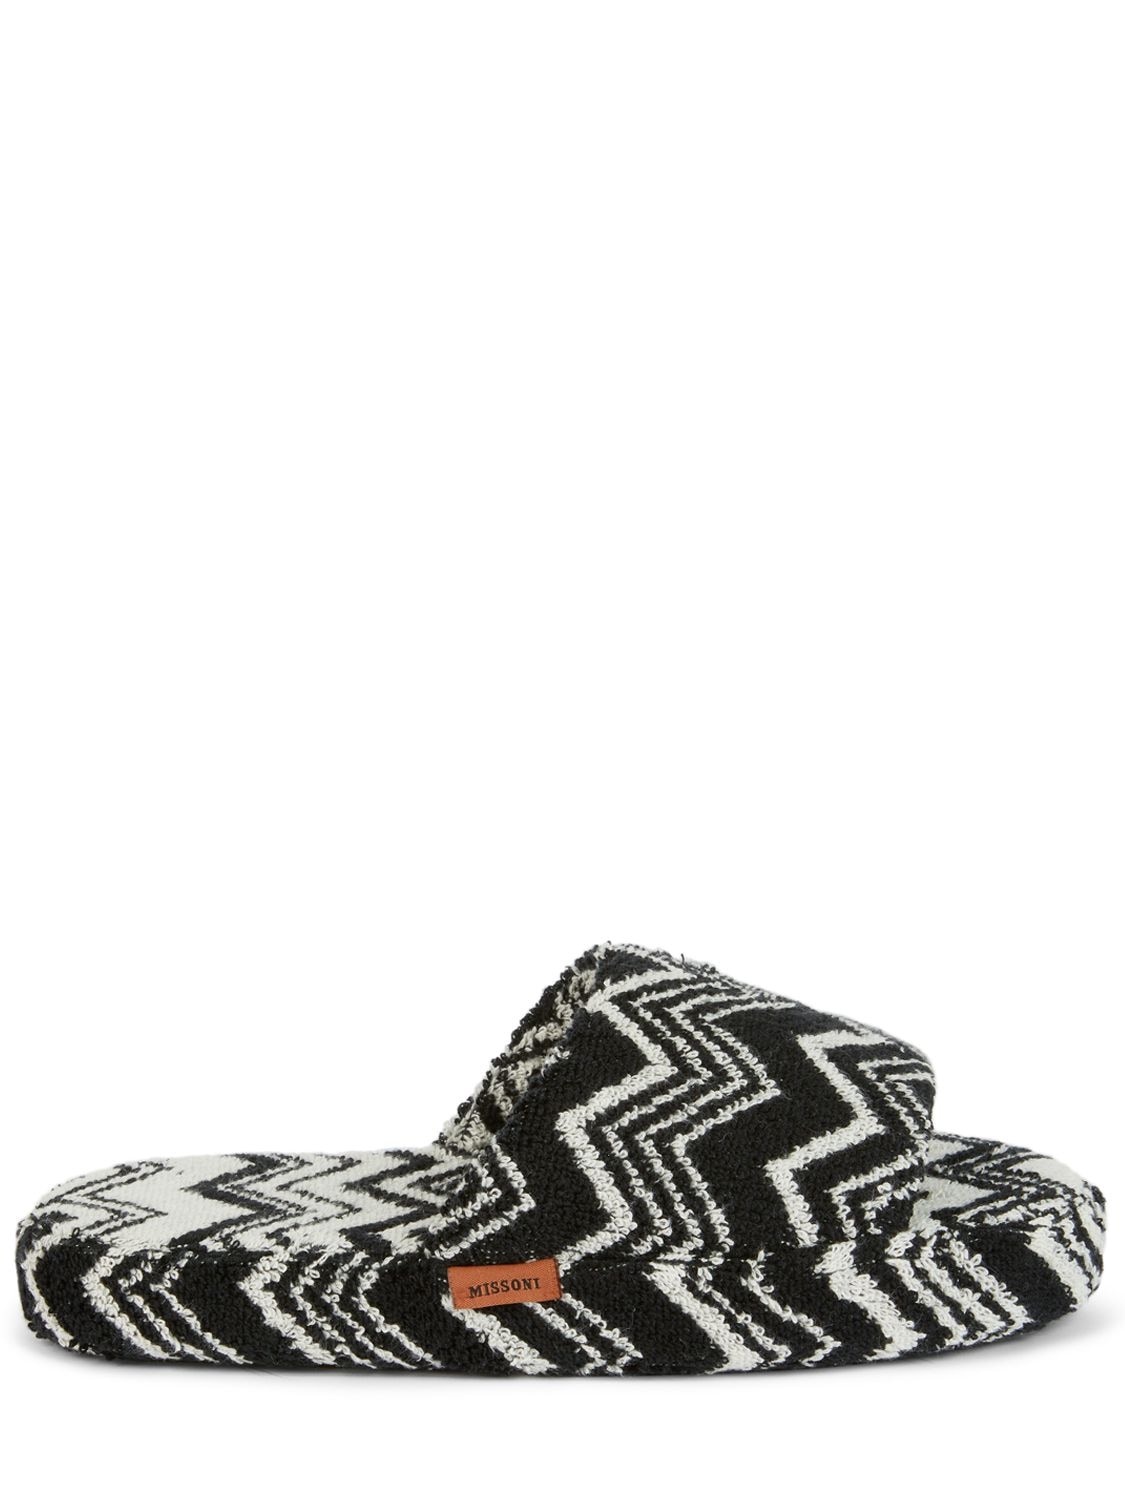 Missoni Home Collection Keith Slippers In Black,white